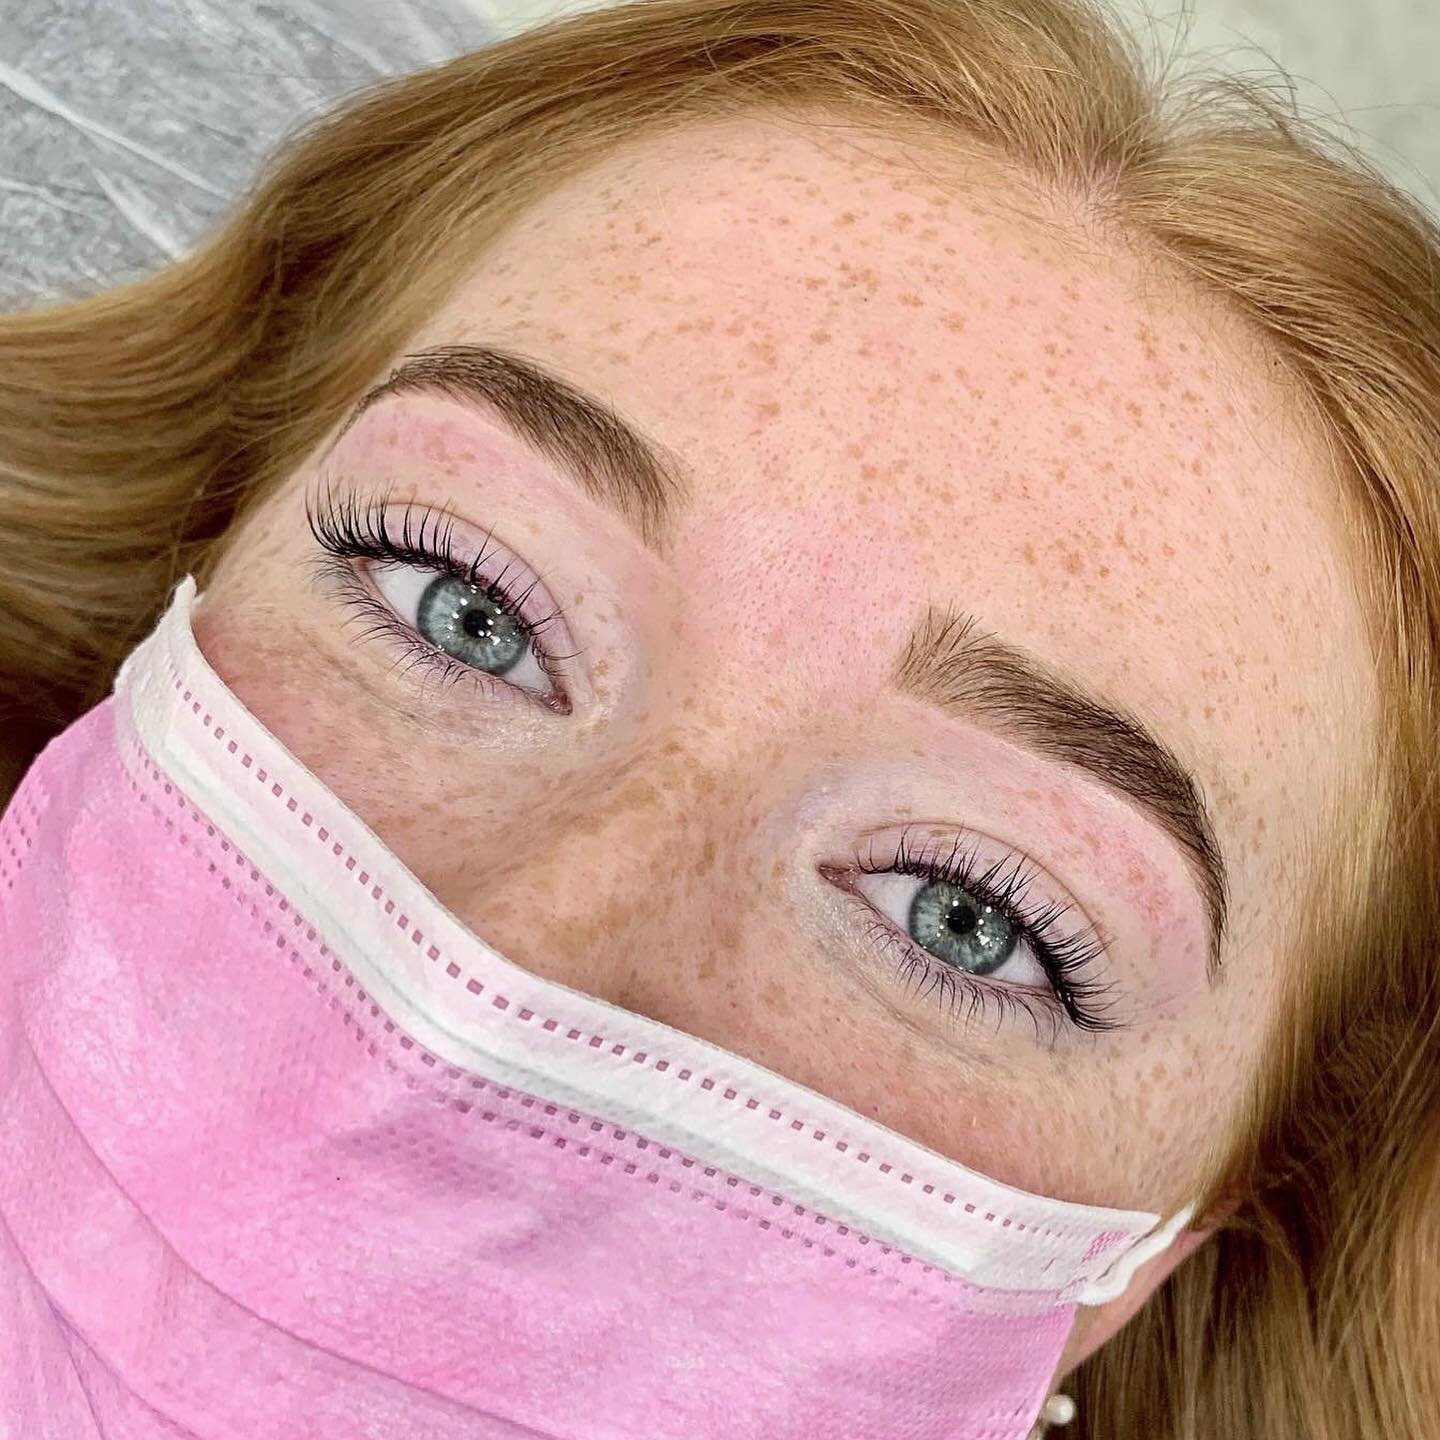 🤩LASH LIFT &amp; HENNA COMBO 💣 

Have you ever seen a better holiday glow up than this? So happy with these results! 

@elleebana One Shot
Times: 6 and 5 mins
Regen Lash Mask 
@supercilium Med Brown Henna 

What do you think? 👀👀👀